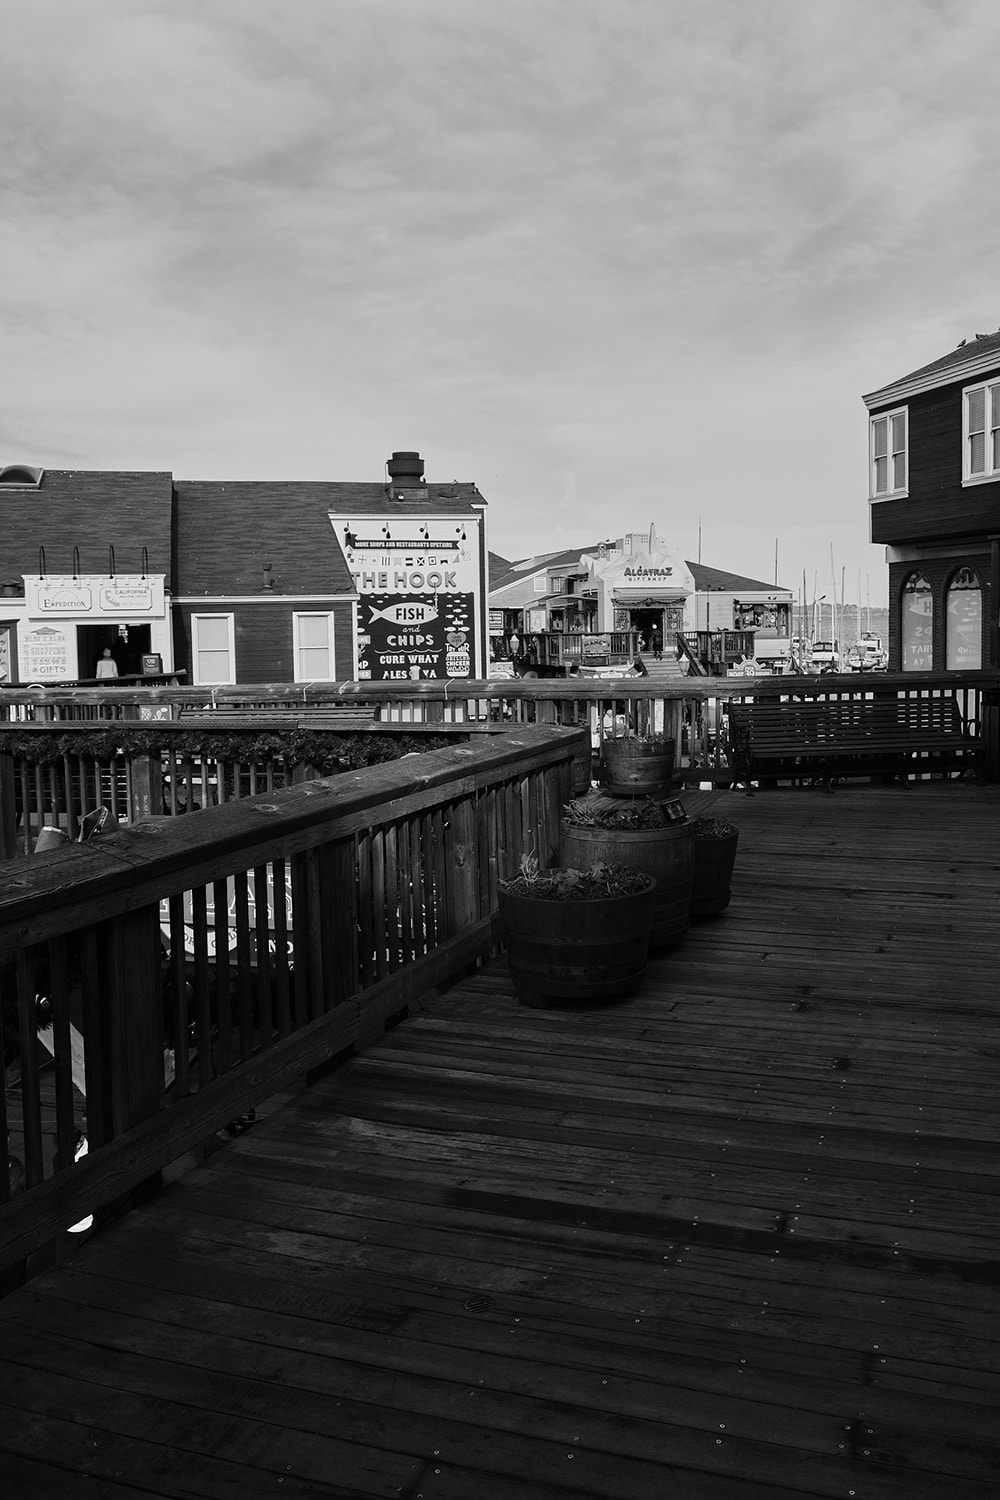 Black and white portrait photo of some building and restaurants on Pier 39 of Fisherman's Wharf.